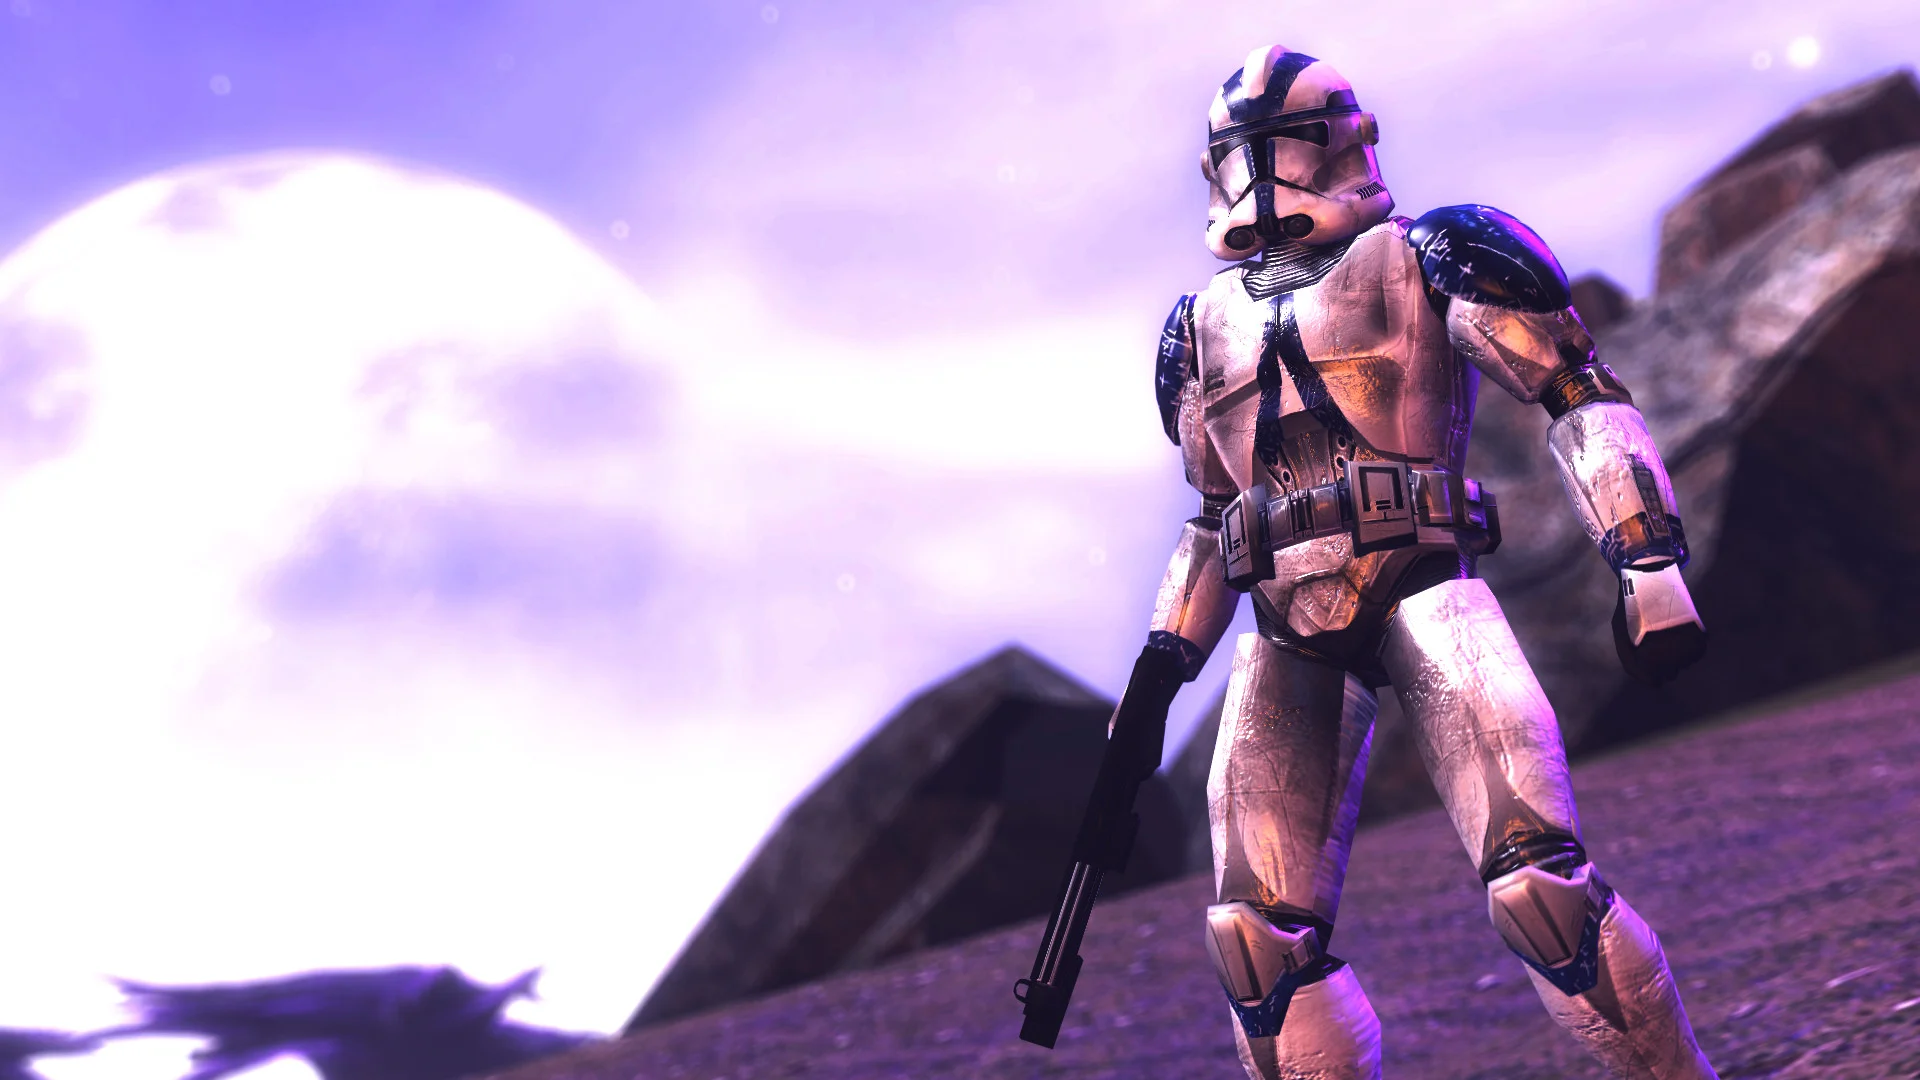 … 501st Clone Trooper standing about by Shacobi